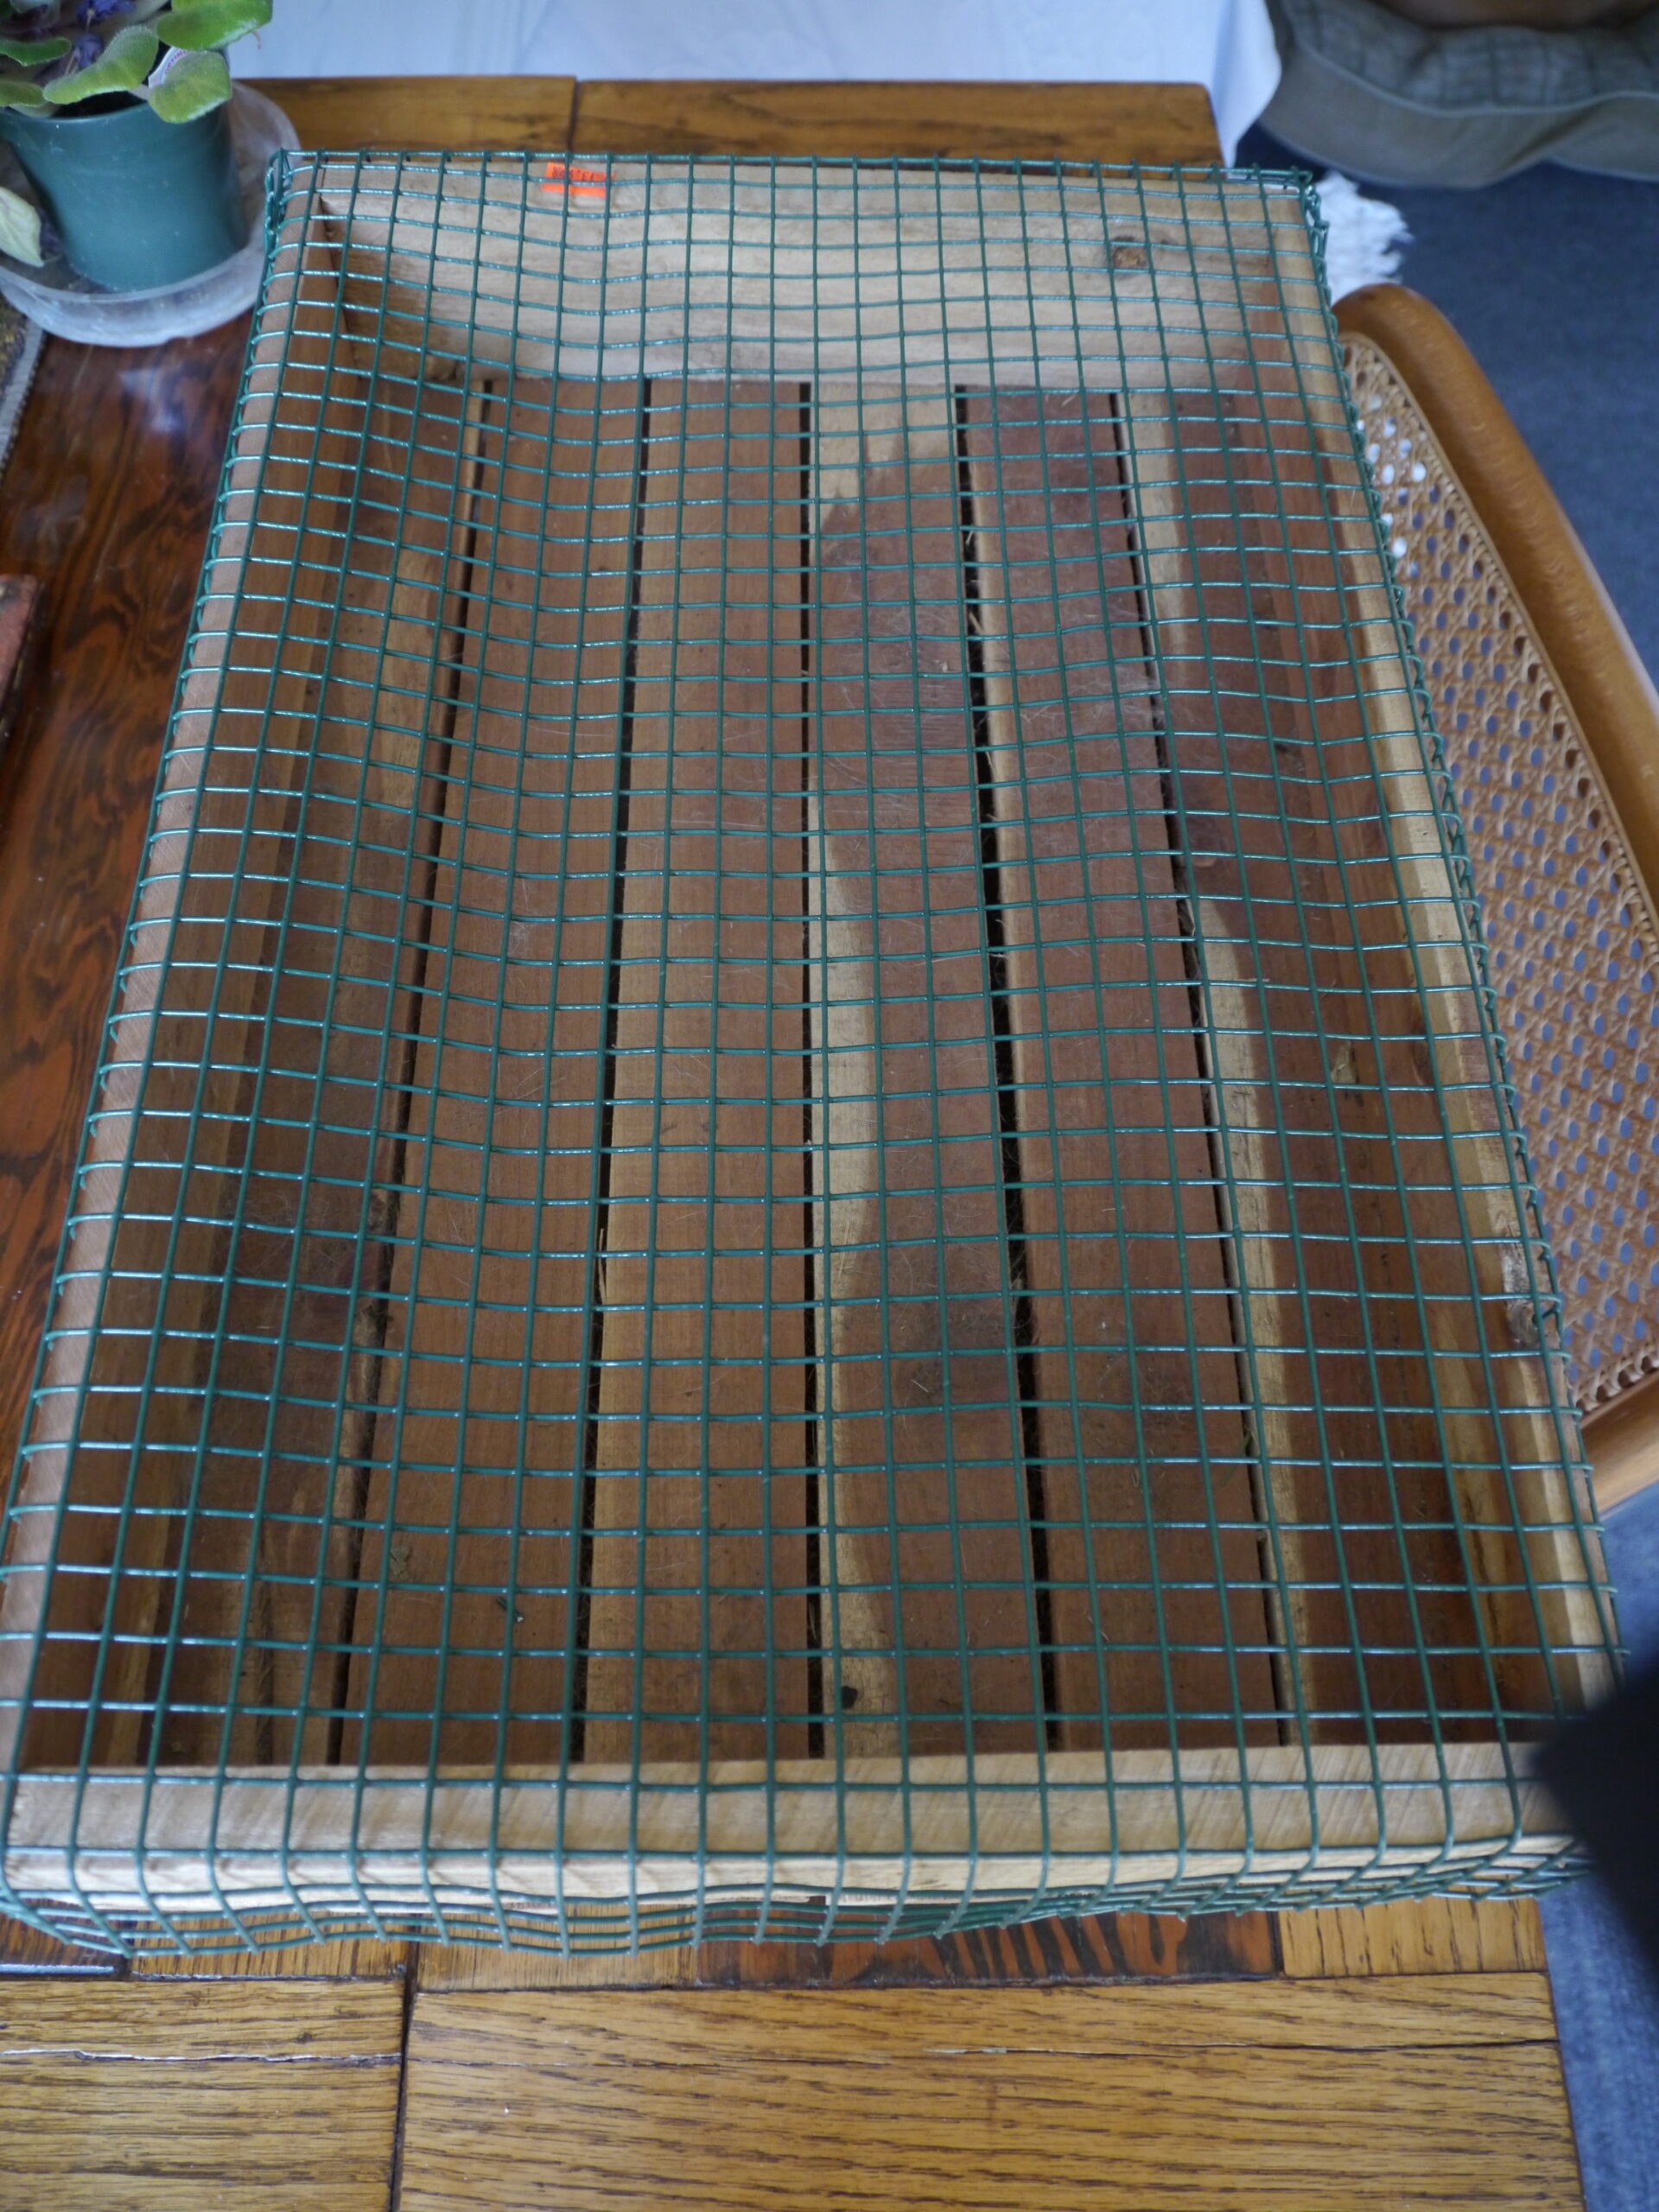 A wooden seeding flat purchased at a garden center. Notice the gaps between the bottom slats that allow for drainage. The plastic-coated mesh on the top was cut from a larger roll with the sides and corners bent to make a tight fit. This mesh is used when the flats are outdoors and it keeps mice and other rodents from stealing seeds and seedlings. This flat is about 2.5 inches deep, 15 inches long and 11 inches wide. ANDREW MESSINGER